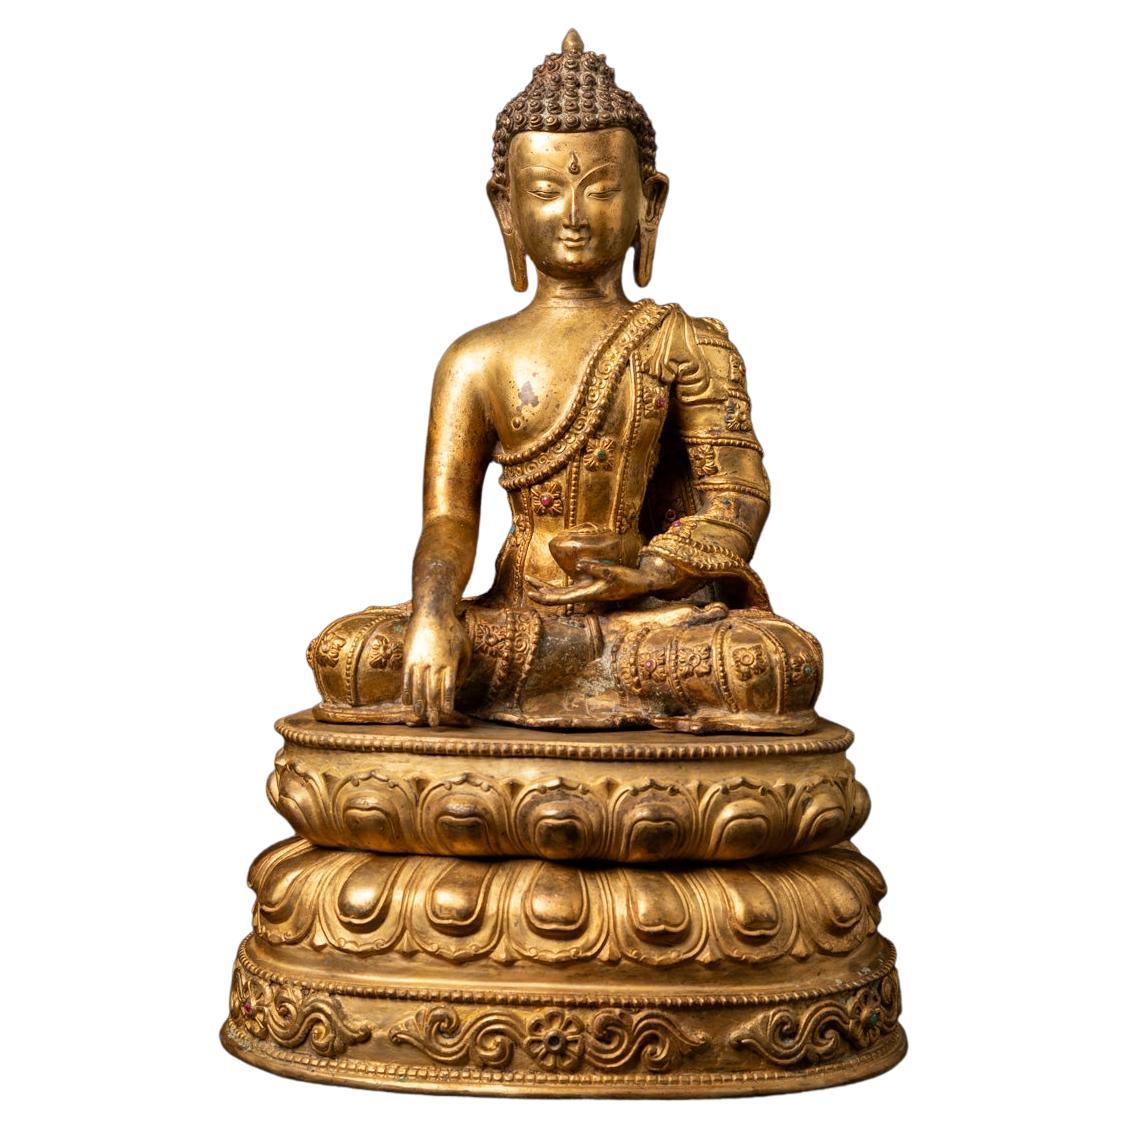 Mid-20th century old bronze Nepali Buddha statue i20.5nlaid with real gem stones